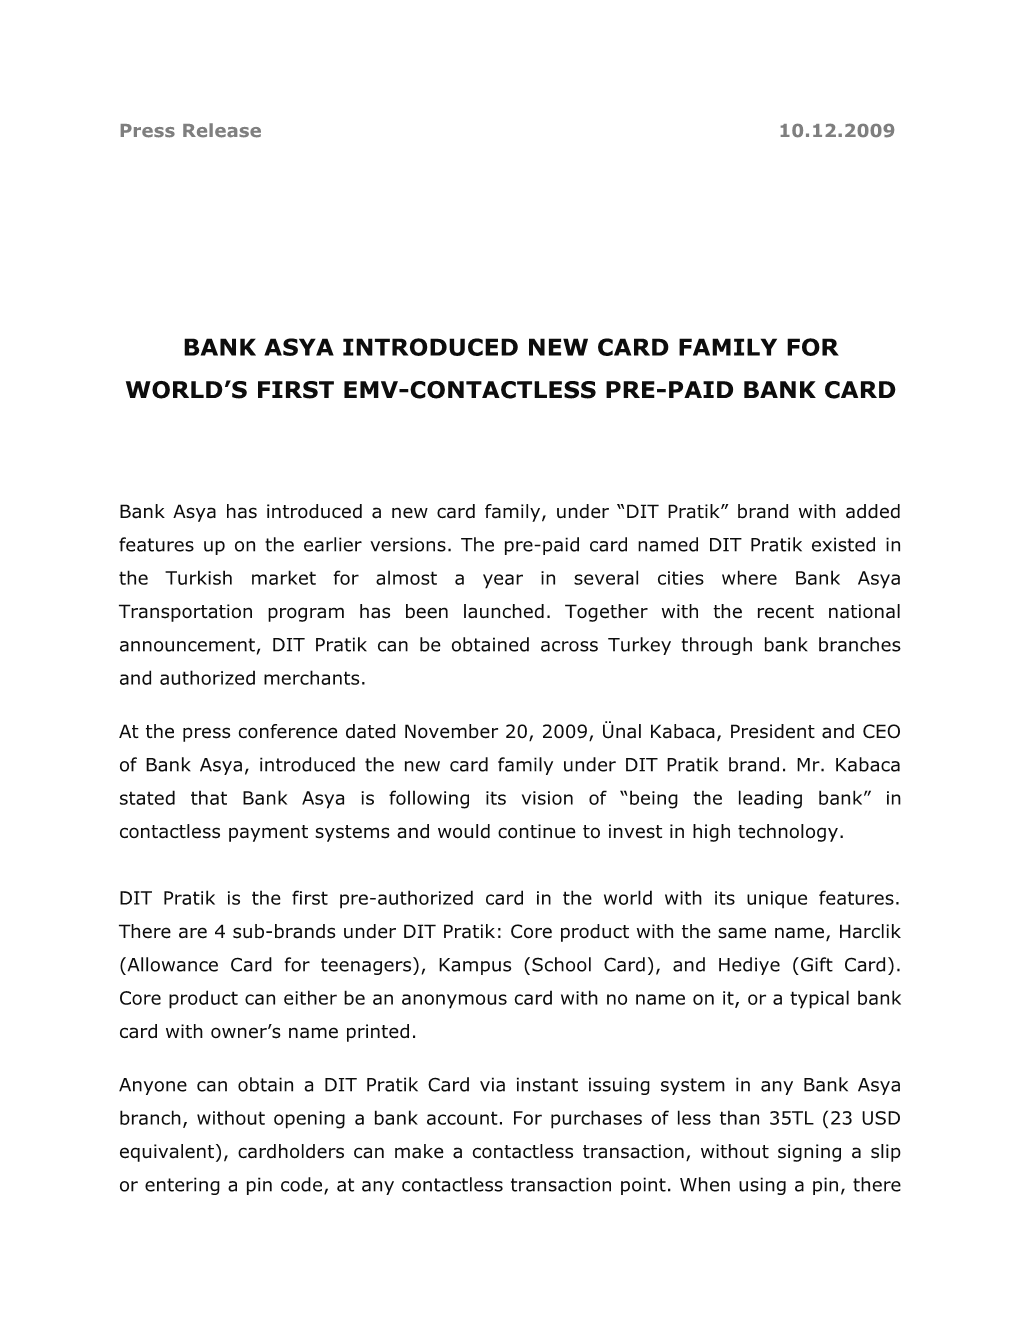 Bank Asya Has Launched a New Card Program: DIT Pratik As a Complementary Part of Bank Asya